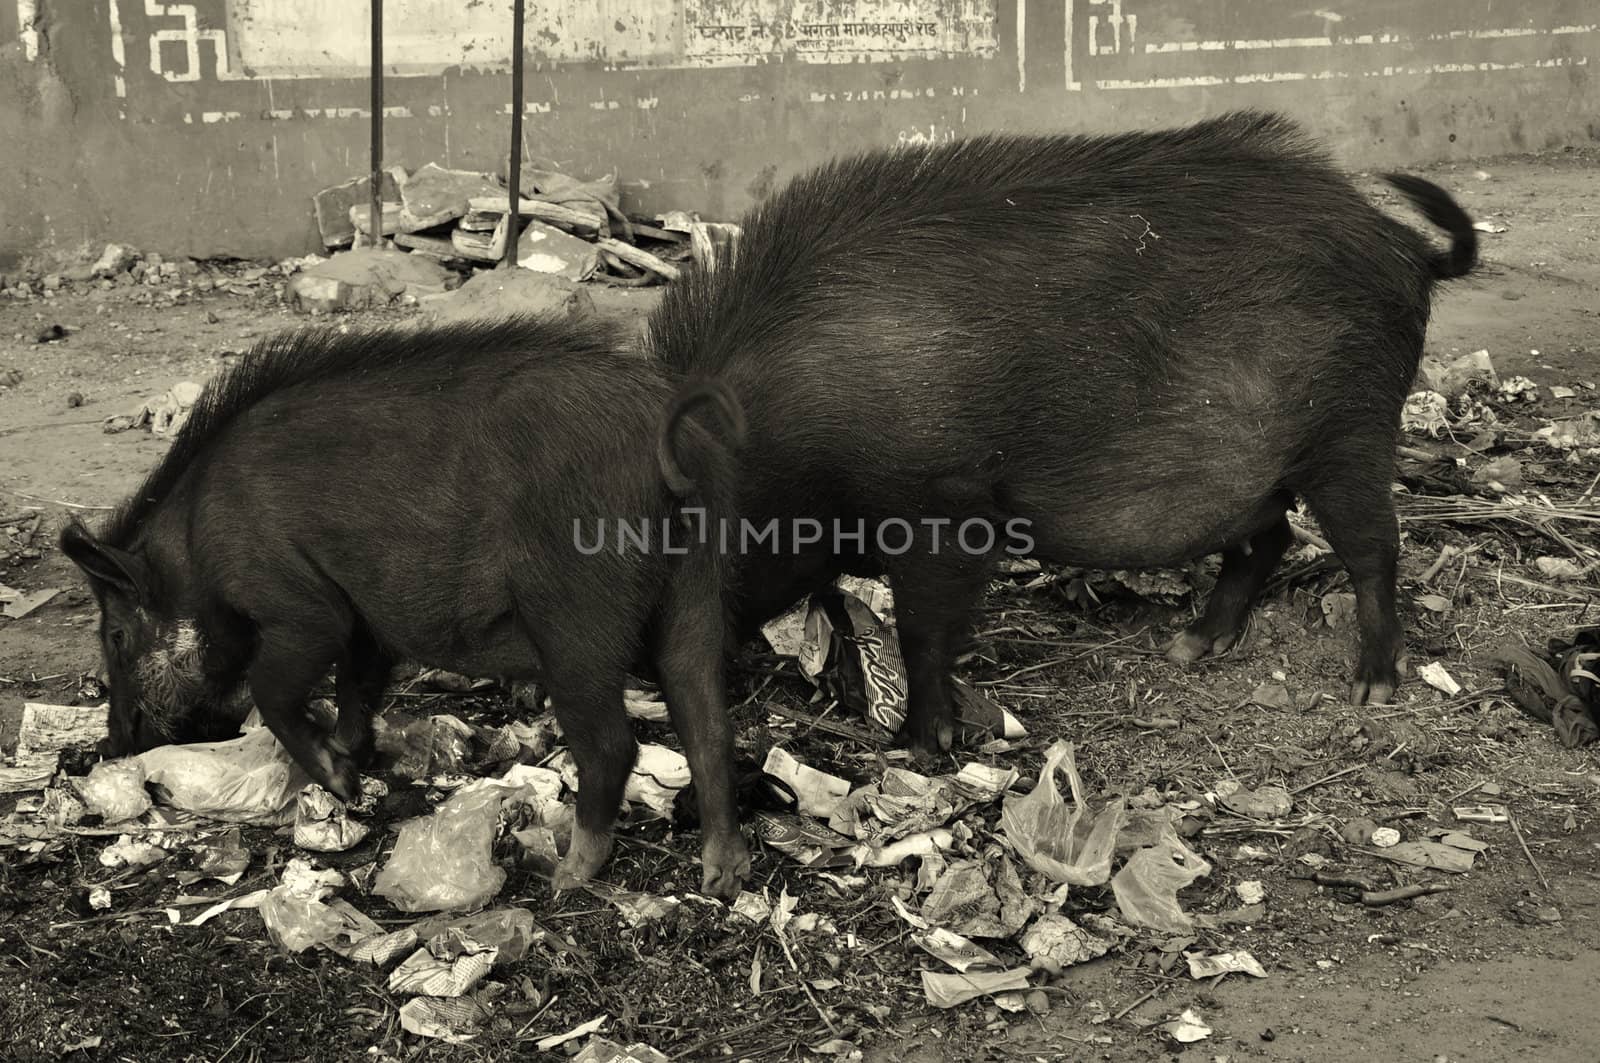 Pigs on the streets of India by kdreams02